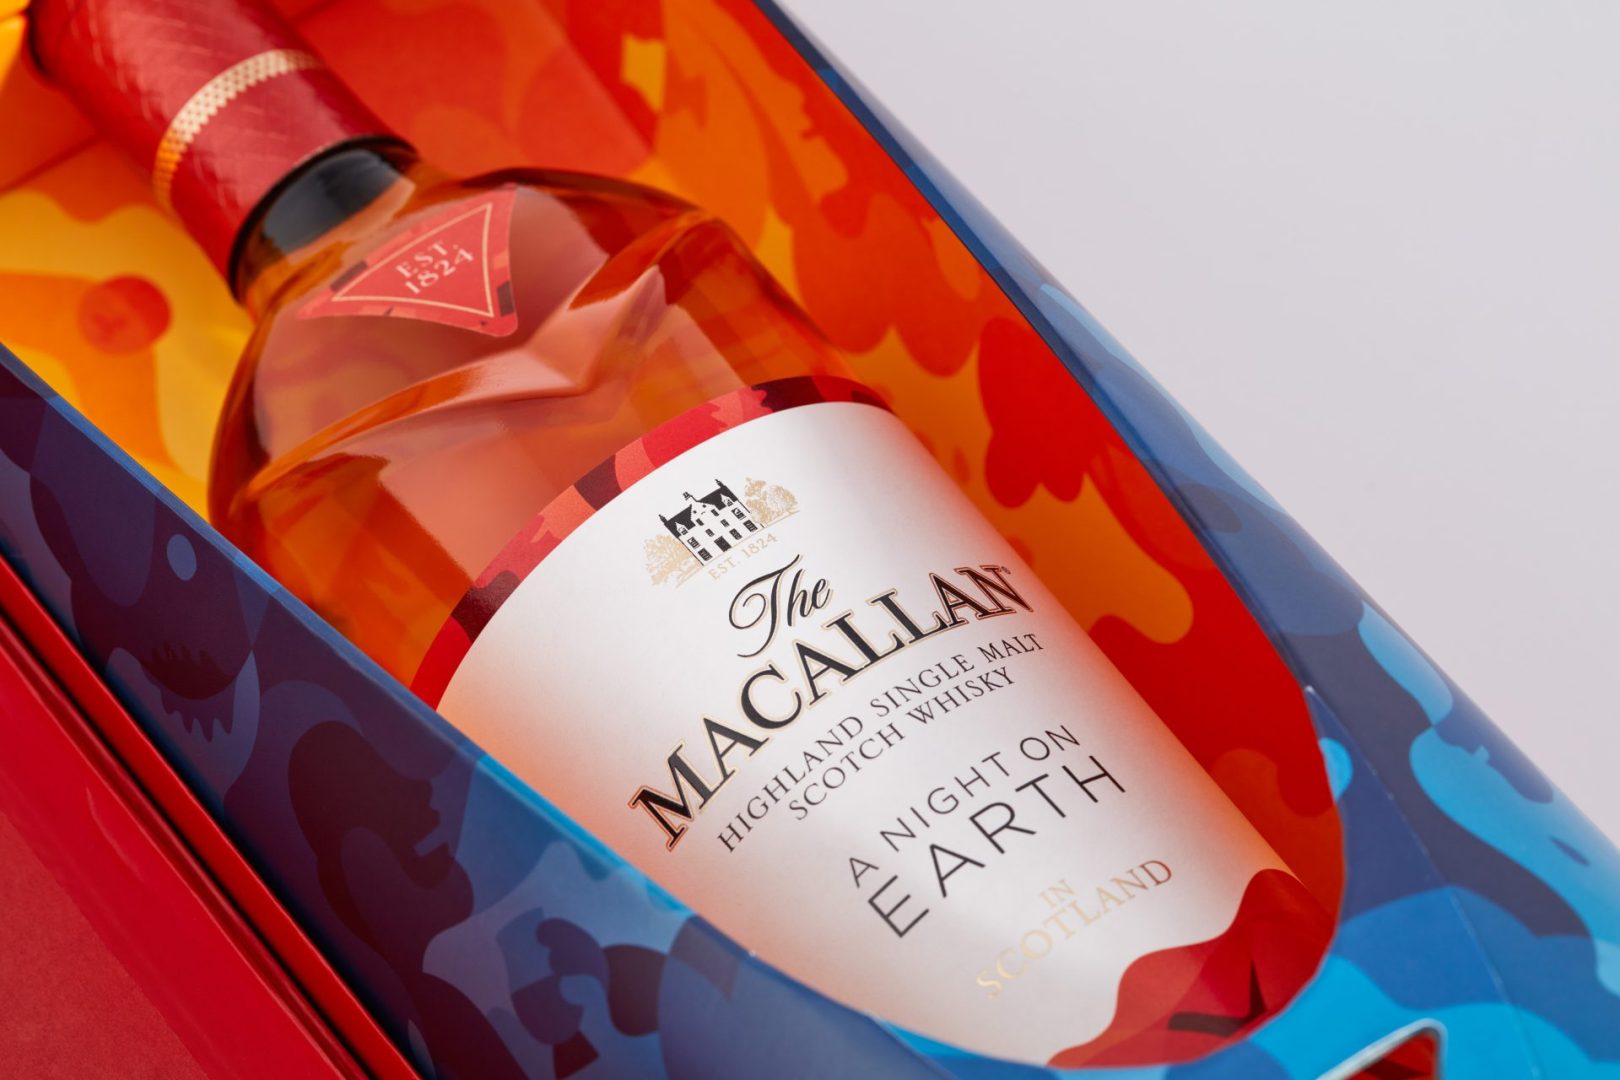 New Year, New Whisky: The Macallan’s A Night On Earth In Scotland